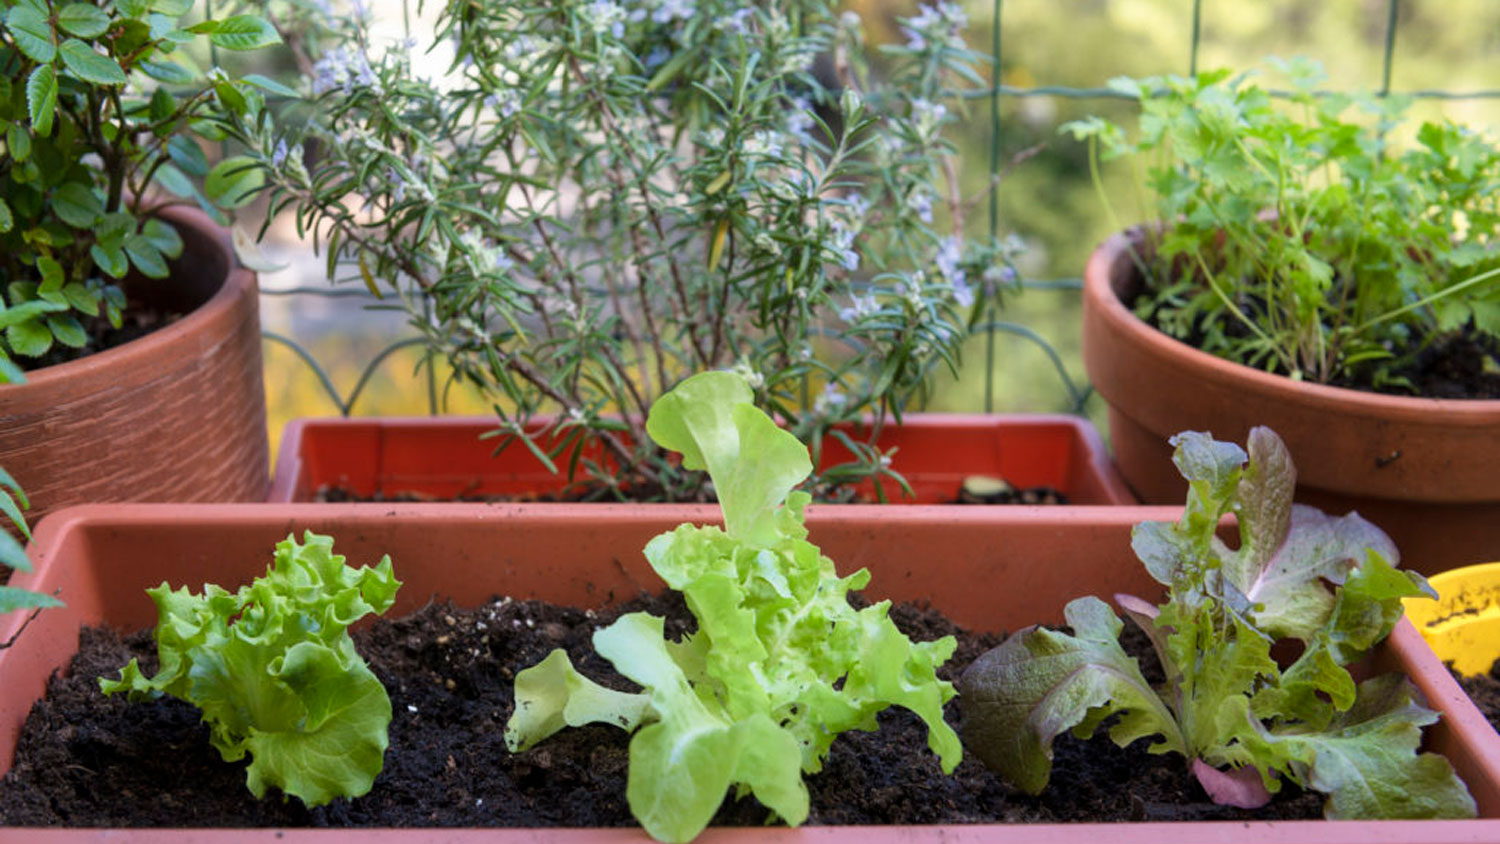 Lettuce leaves growing in a container garden